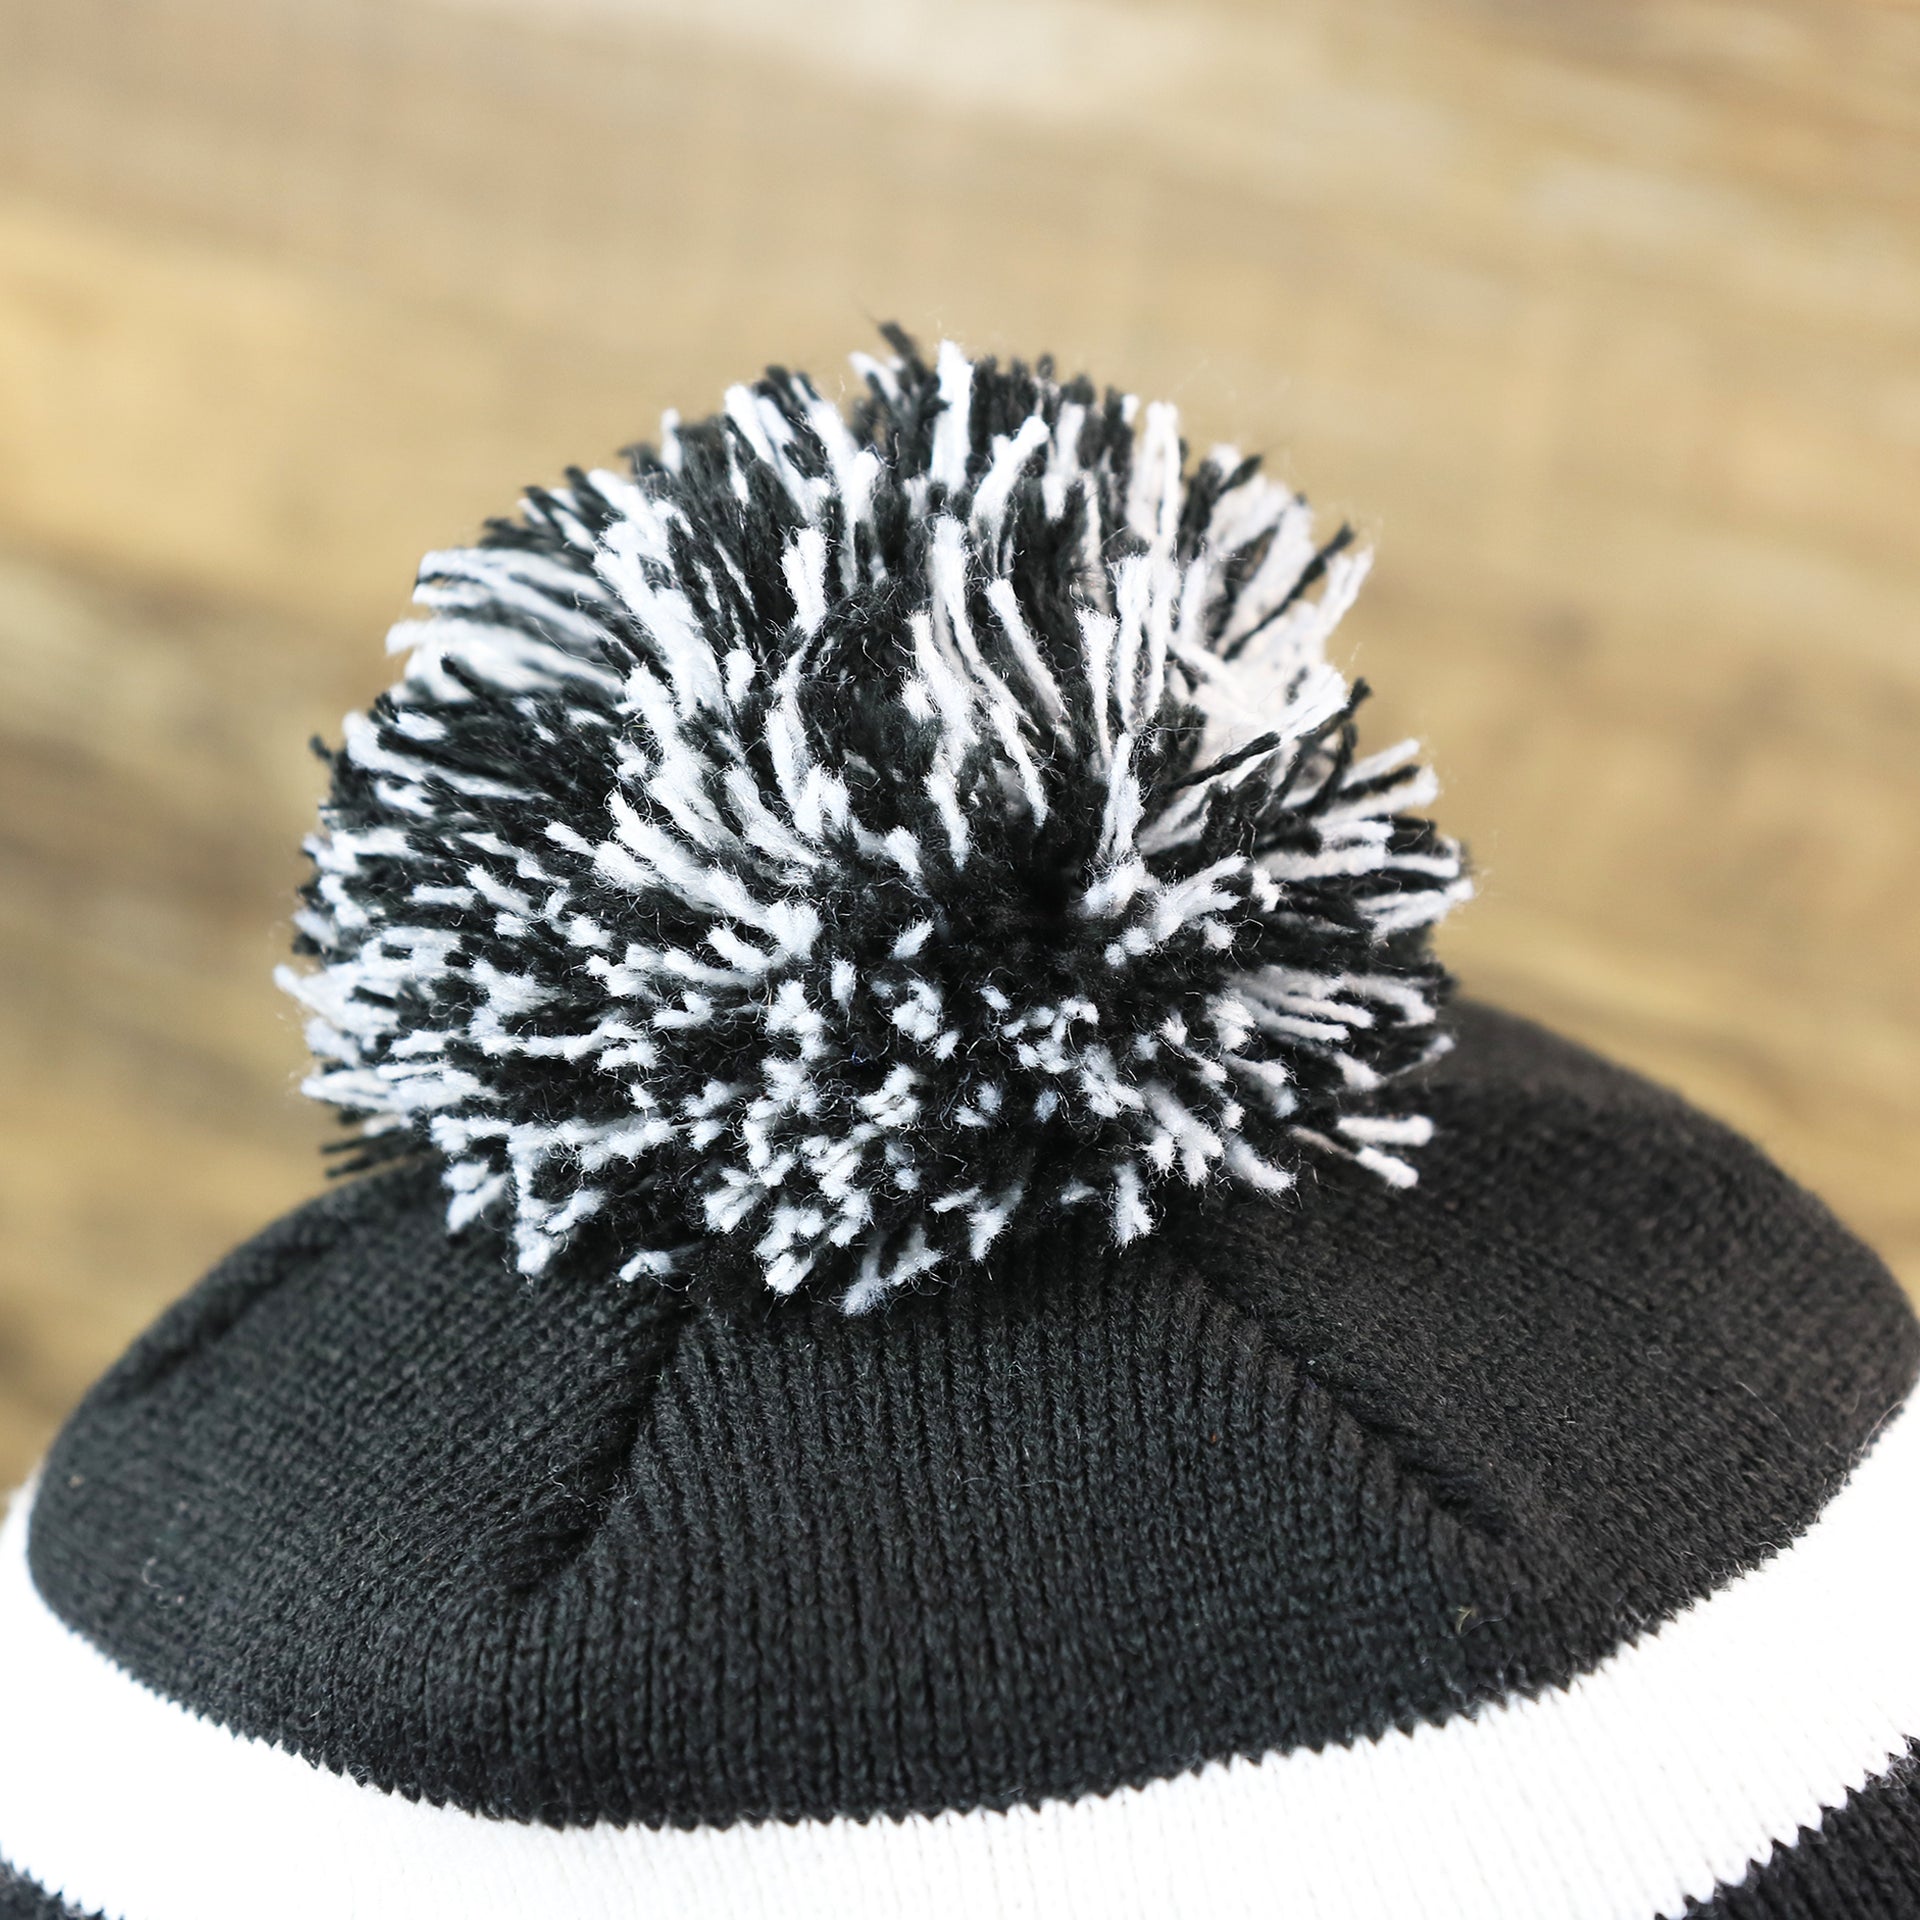 The Black And White Pom Pom on the Philadelphia Flyers Mascot Gritty Black And White Striped Cuffed Pom Pom Winter Beanie | Black Winter Beanie